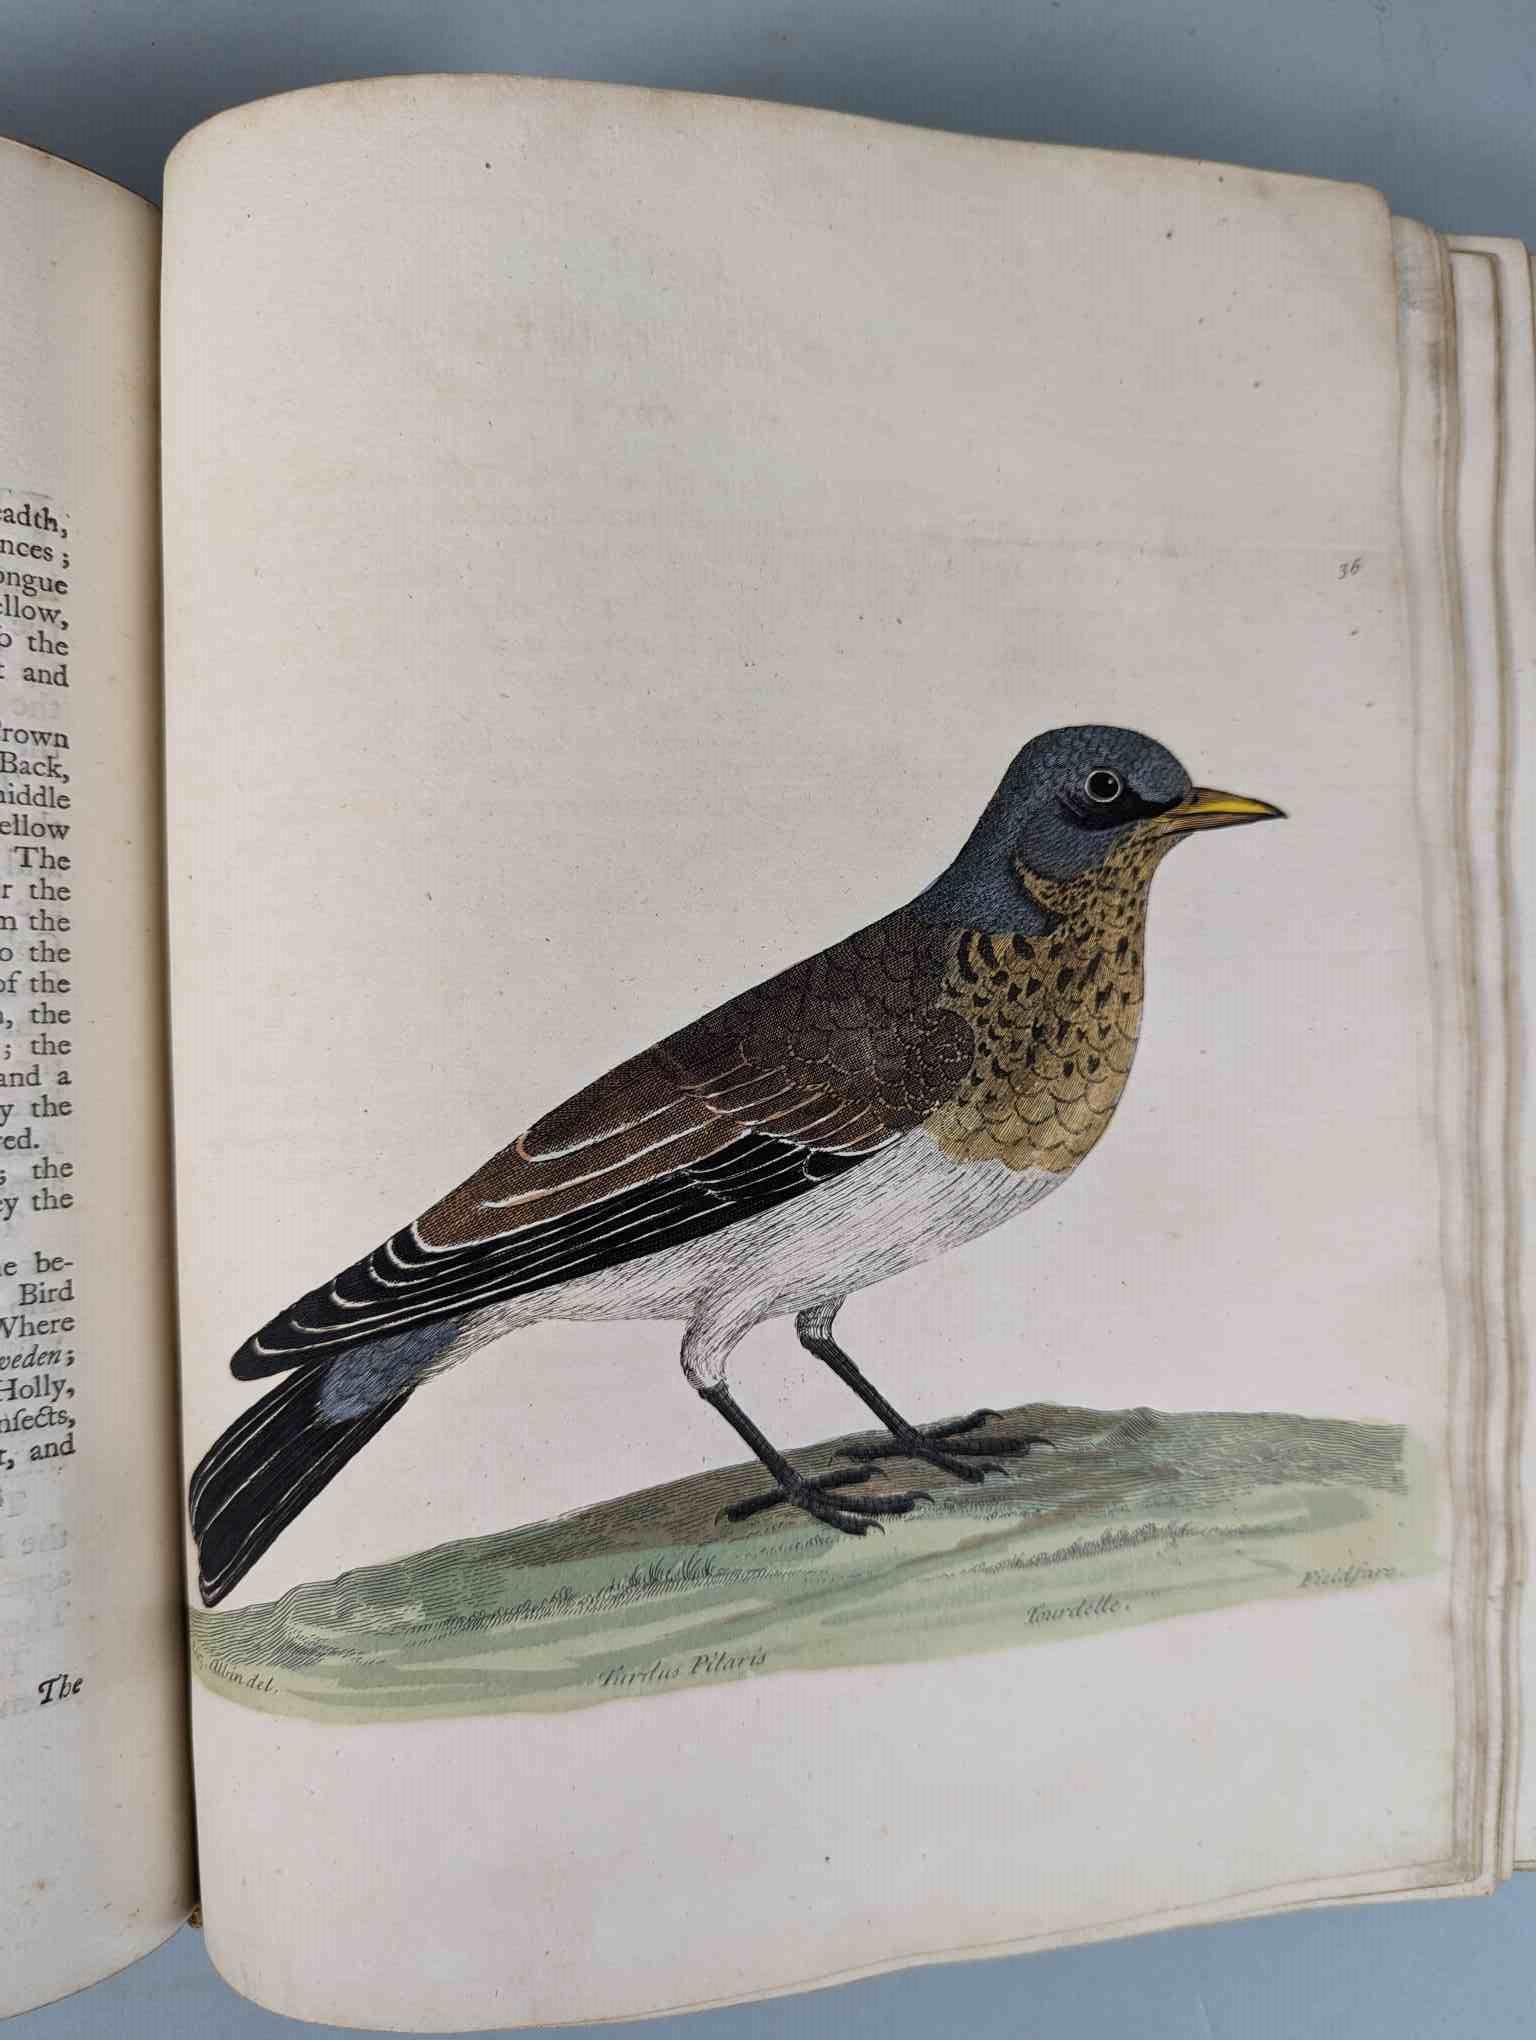 ALBIN, Eleazar. A Natural History of Birds, to which are added, Notes and Observations by W. - Image 39 of 208